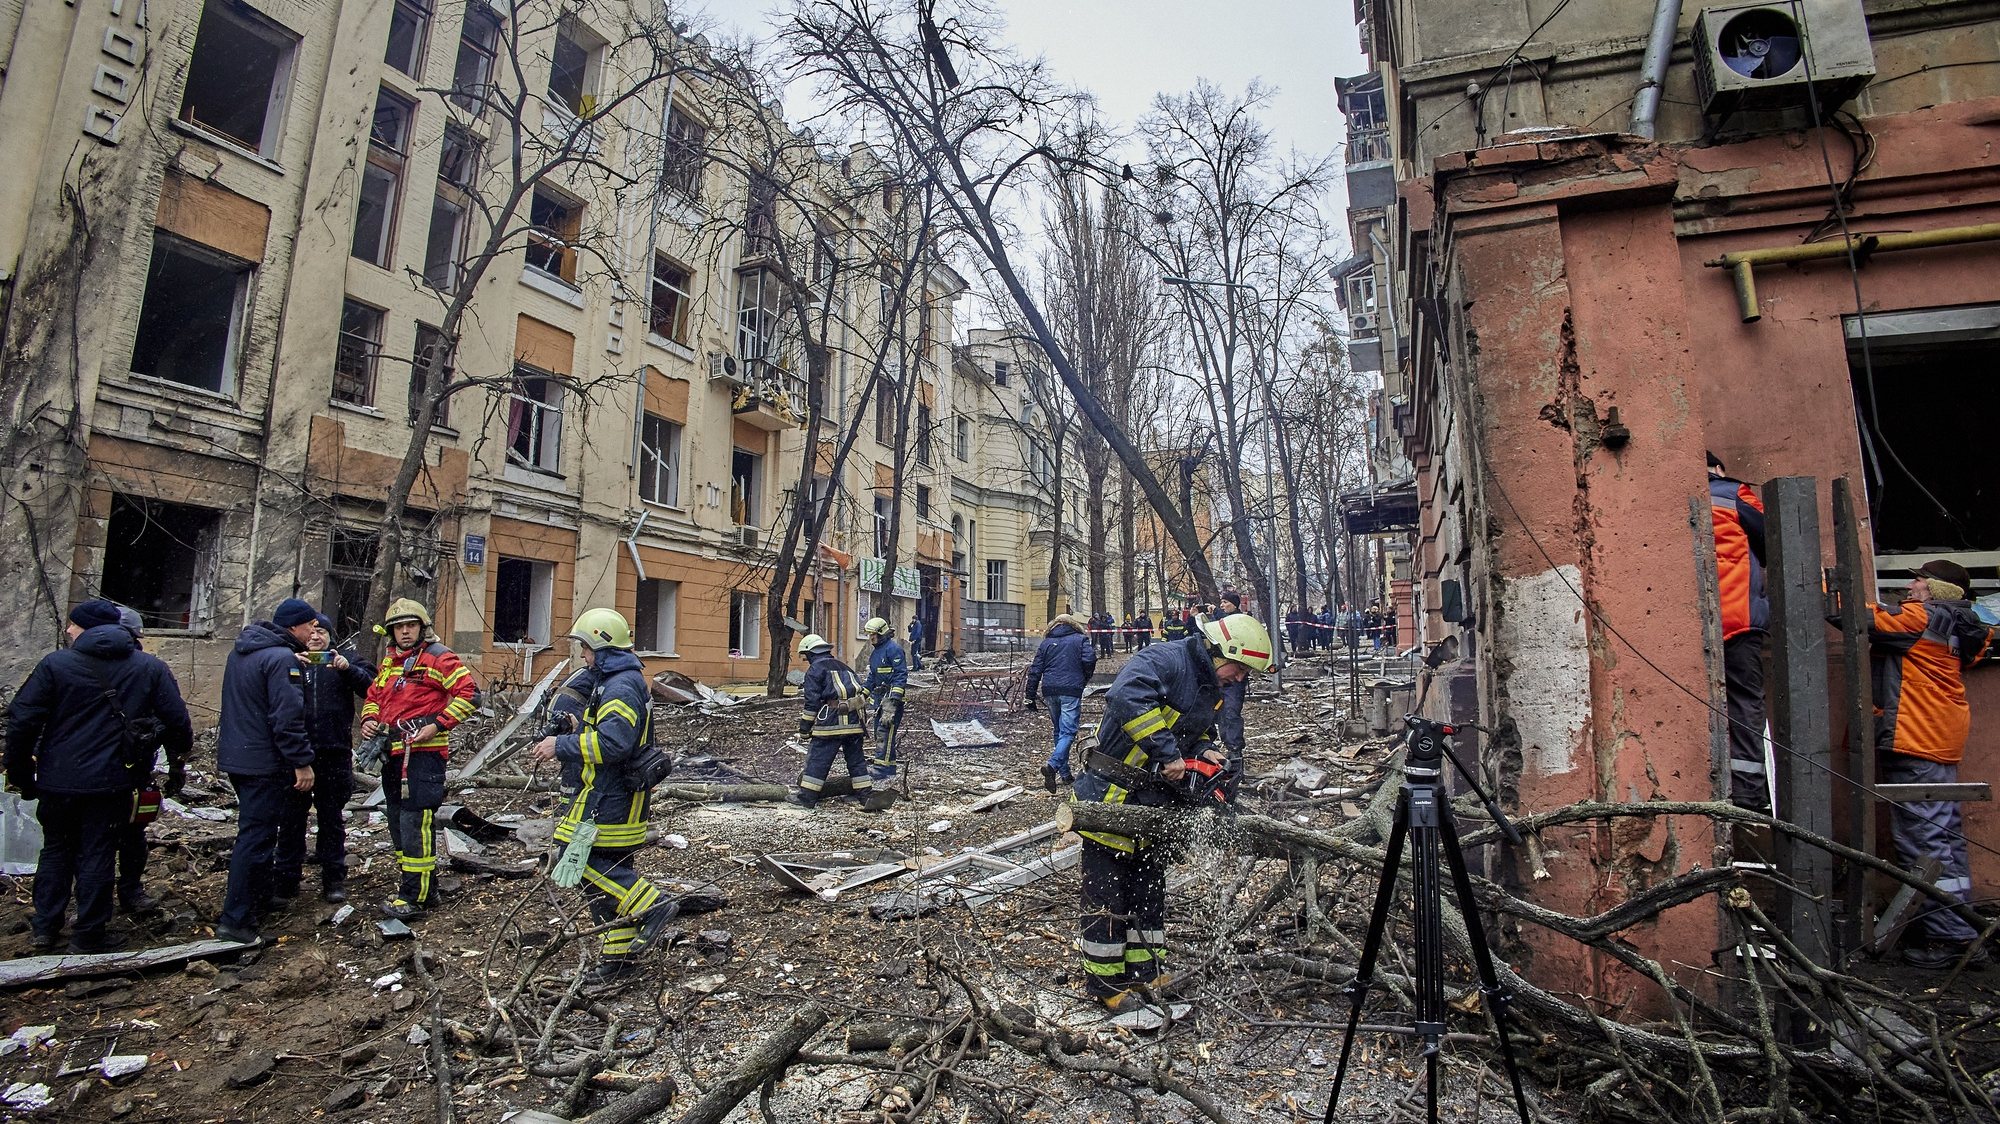 epa10448649 Ukrainian rescuers work at the site of a damaged residential building following a missile strike, in Kharkiv, northeastern Ukraine, 05 February 2023, amid Russia&#039;s invasion. At least four people were injured after two Russian missiles hit downtown Kharkiv on 05 February, the head of the Kharkiv regional military administration, Oleg Sinegubov wrote on telegram. Kharkiv and surrounding areas have been the target of heavy shelling since February 2022, when Russian troops entered Ukraine starting a conflict that has provoked destruction and a humanitarian crisis.  EPA/SERGEY KOZLOV